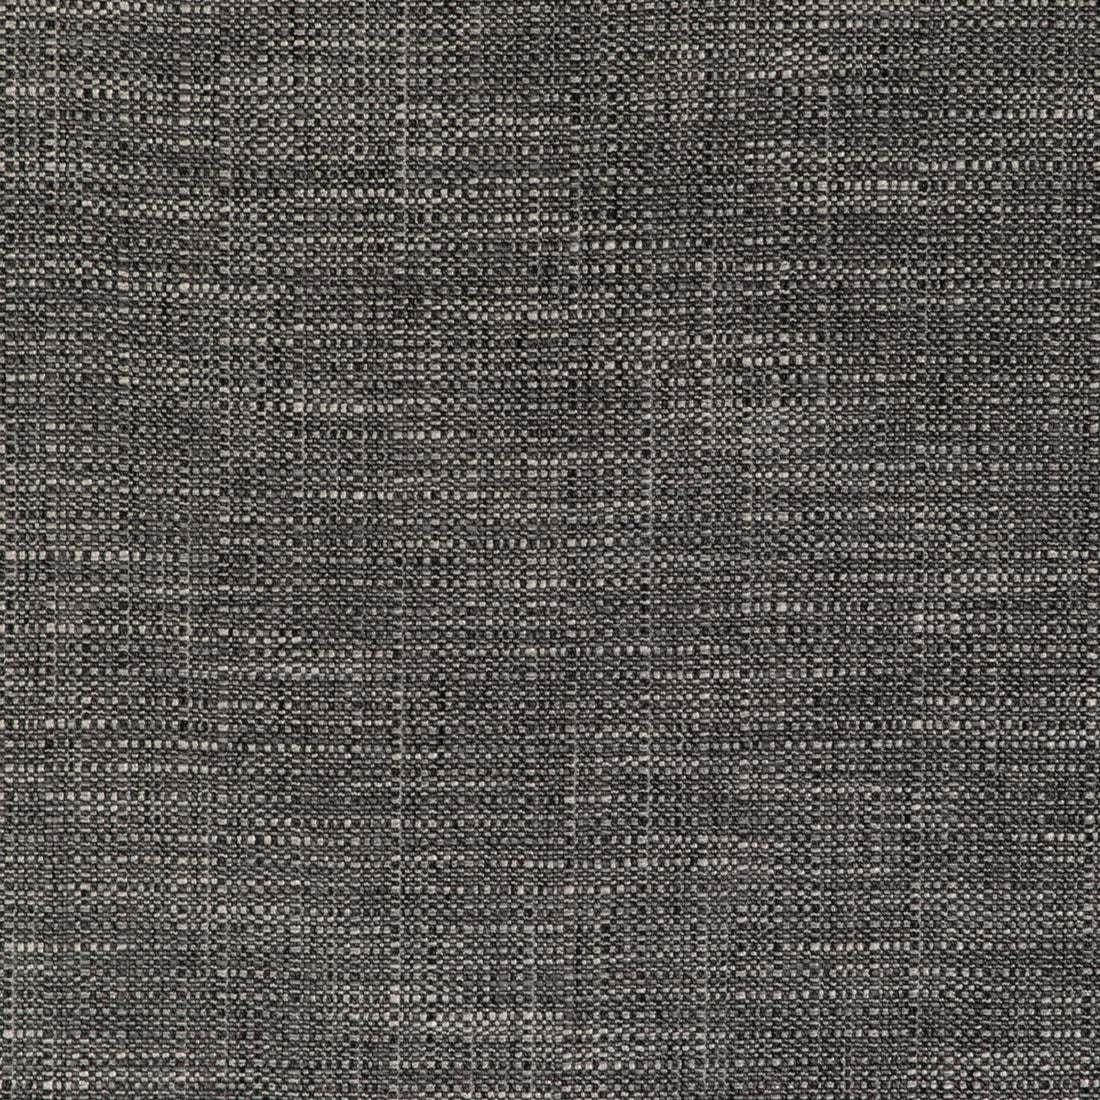 Kravet Design fabric in 37137-8 color - pattern 37137.8.0 - by Kravet Design in the Woven Colors collection